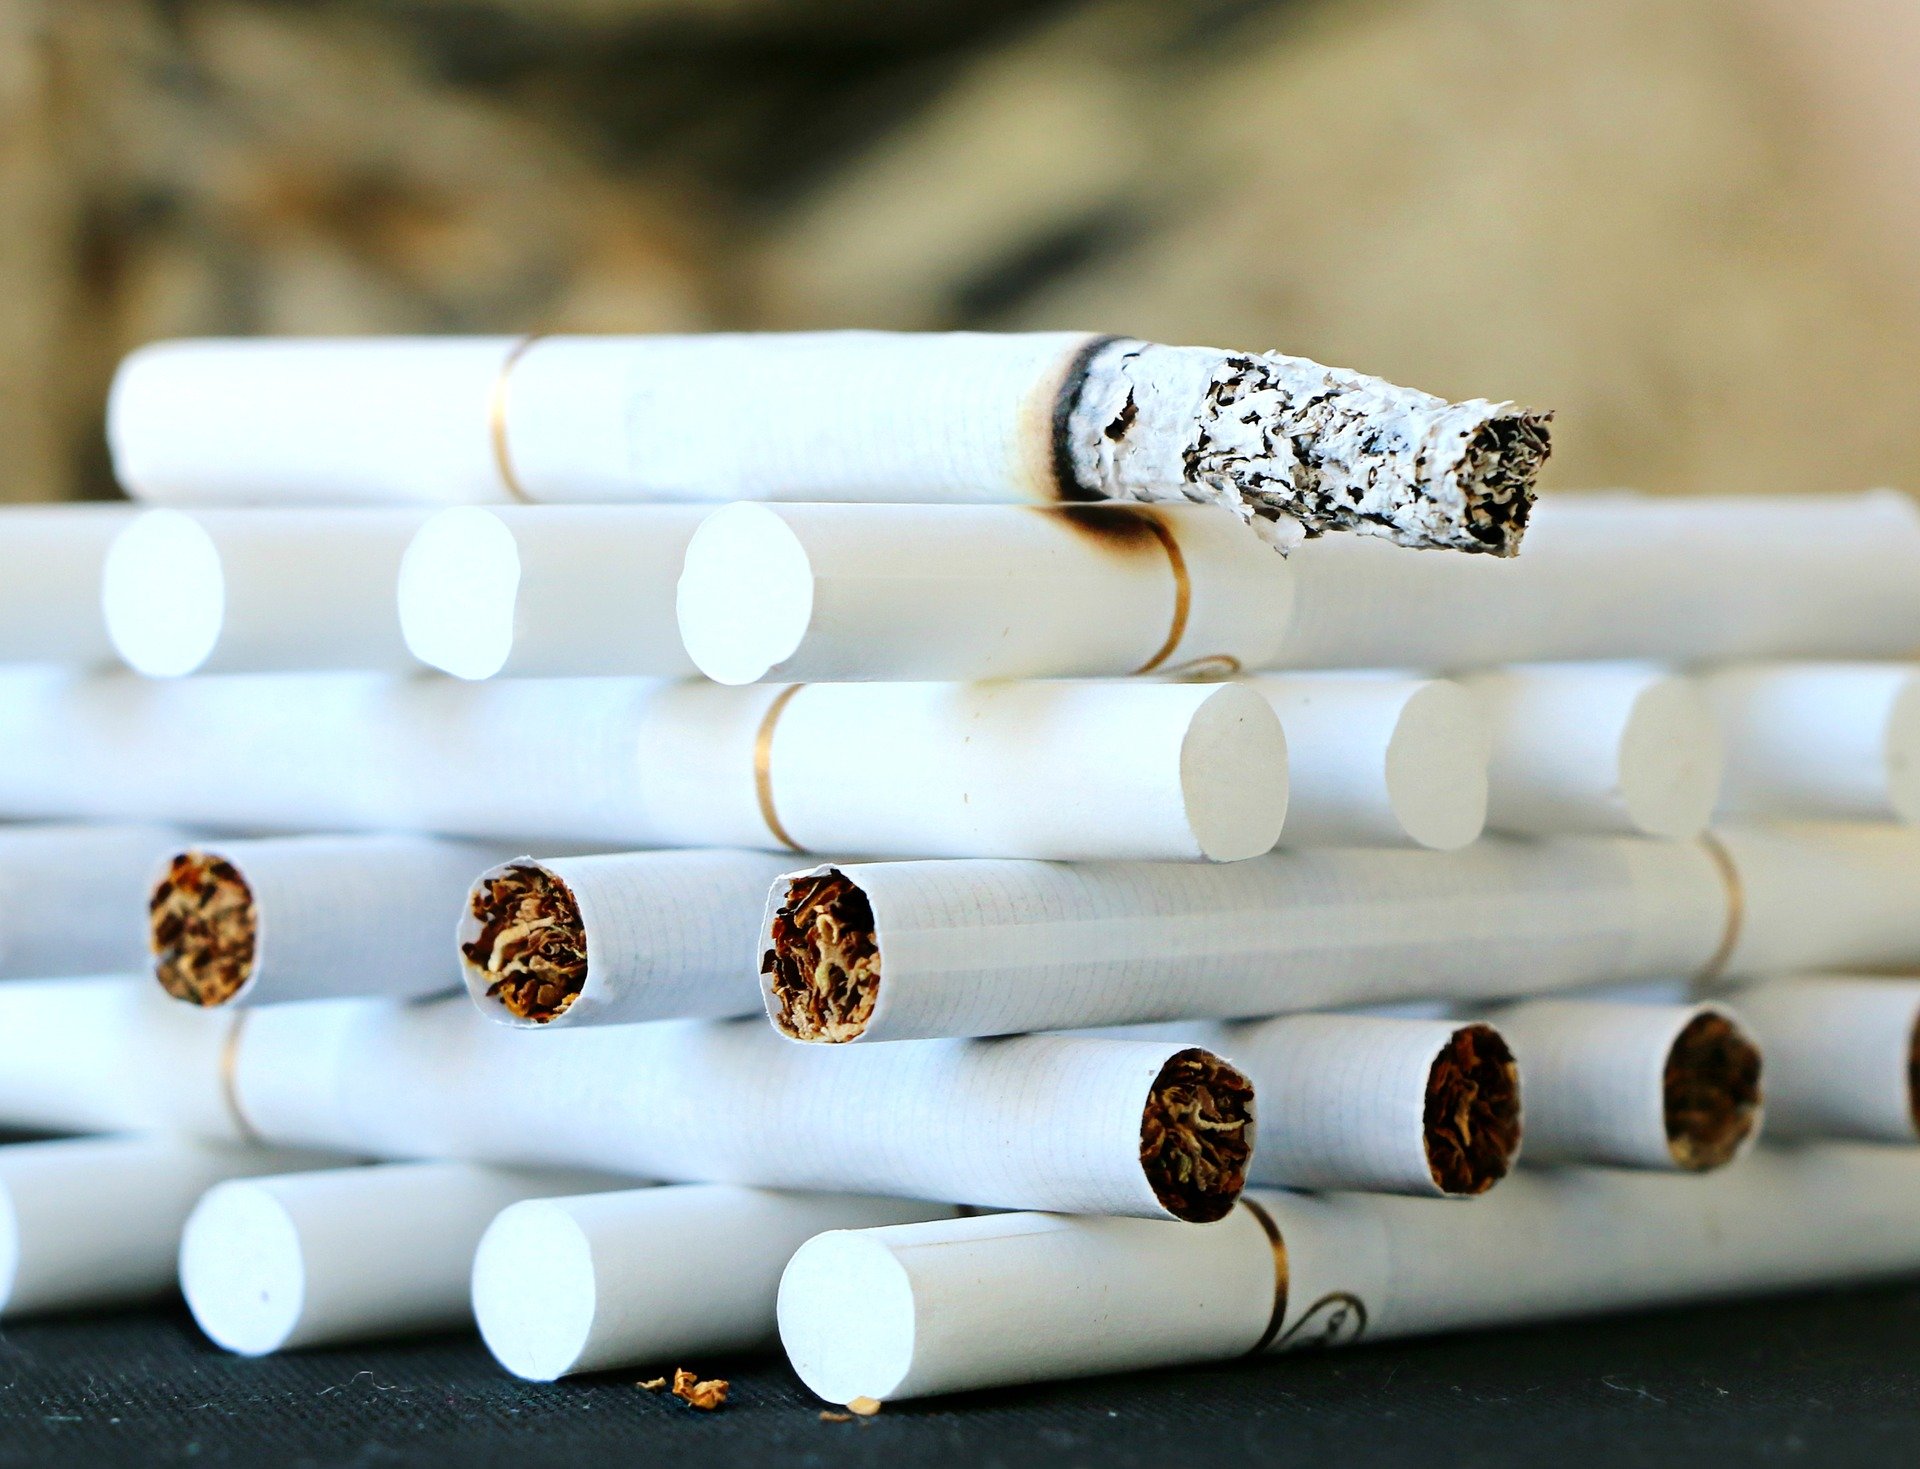 Covert tobacco industry marketing tactics exposed by former employees